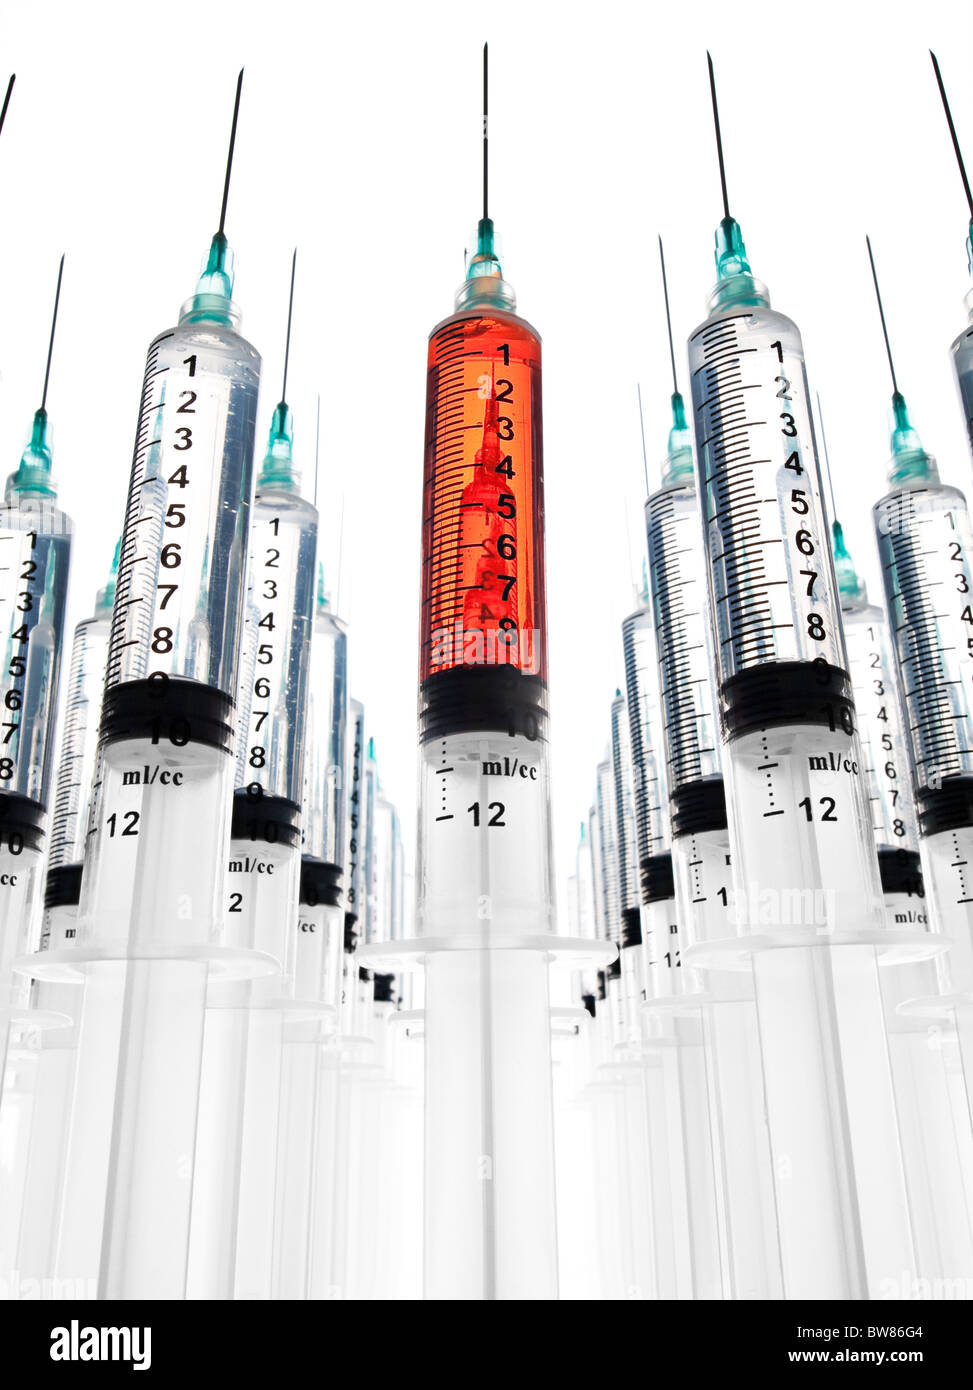 Multiple rows of syringes, one filled with blood Stock Photo